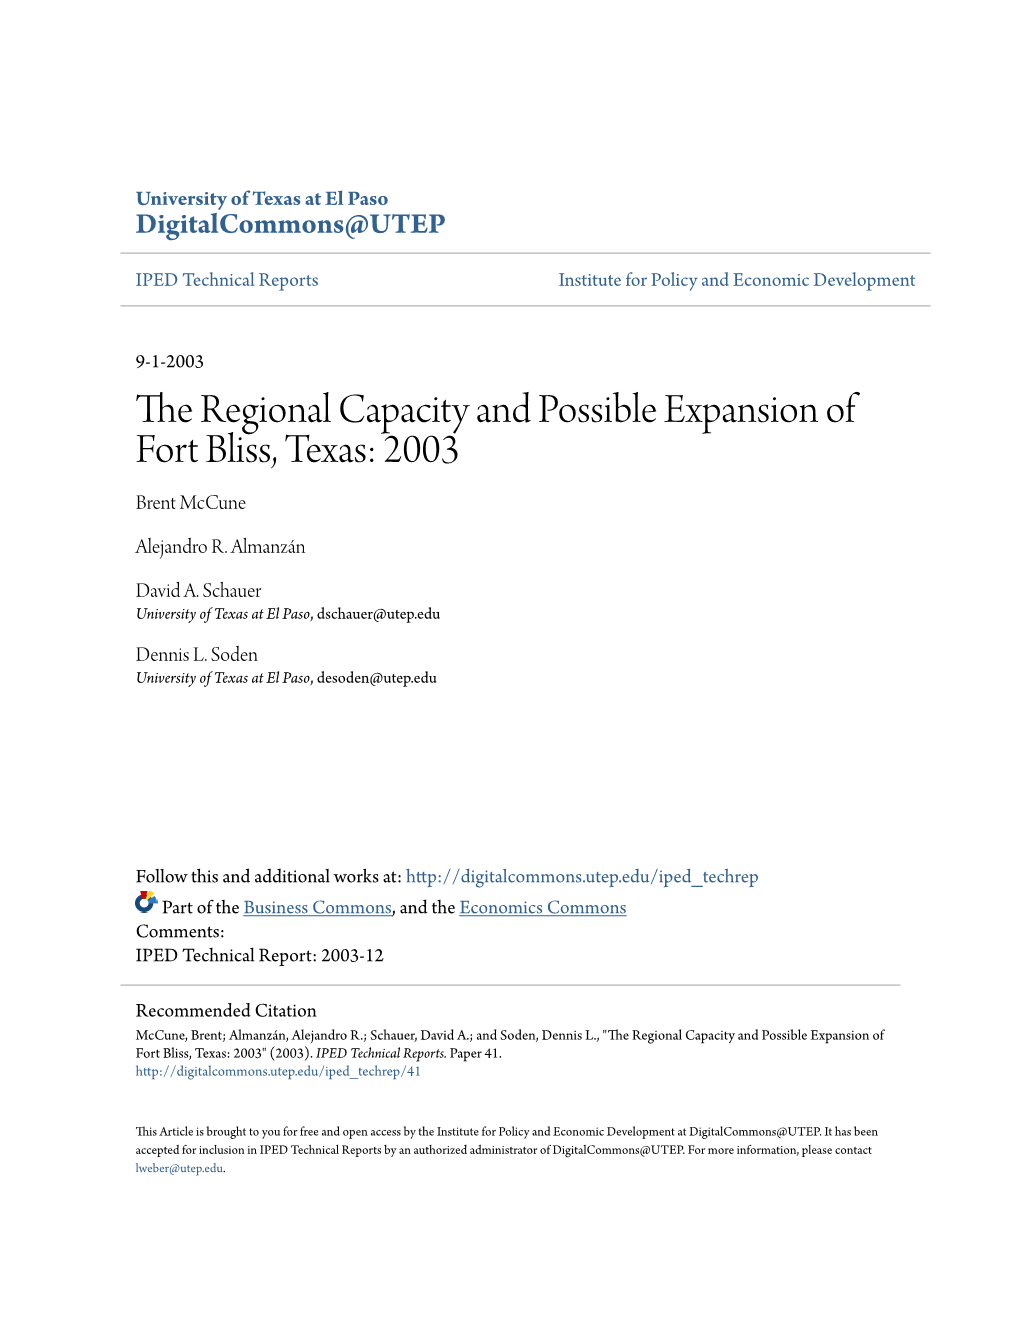 The Regional Capacity and Possible Expansion of Fort Bliss, Texas: 2003 Brent Mccune